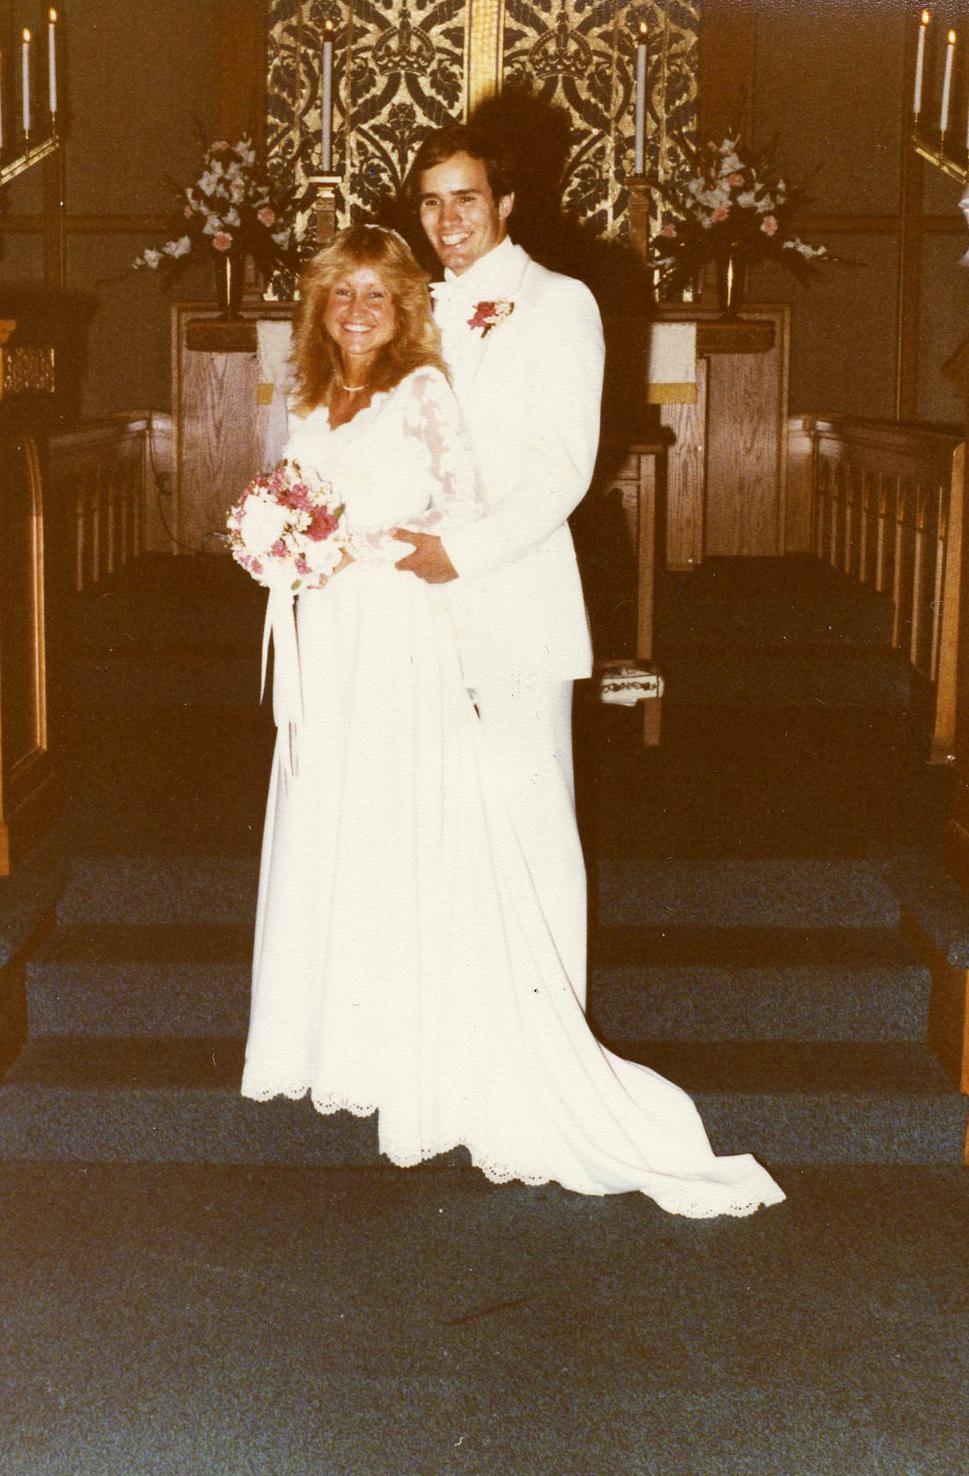 Dave and Ann tied the knot in 1980. The couple were drawn to one another for their shared love for God. (Courtesy of <a href="https://www.facebook.com/DaveAnnWilson/">Dave and Ann Wilson</a>)